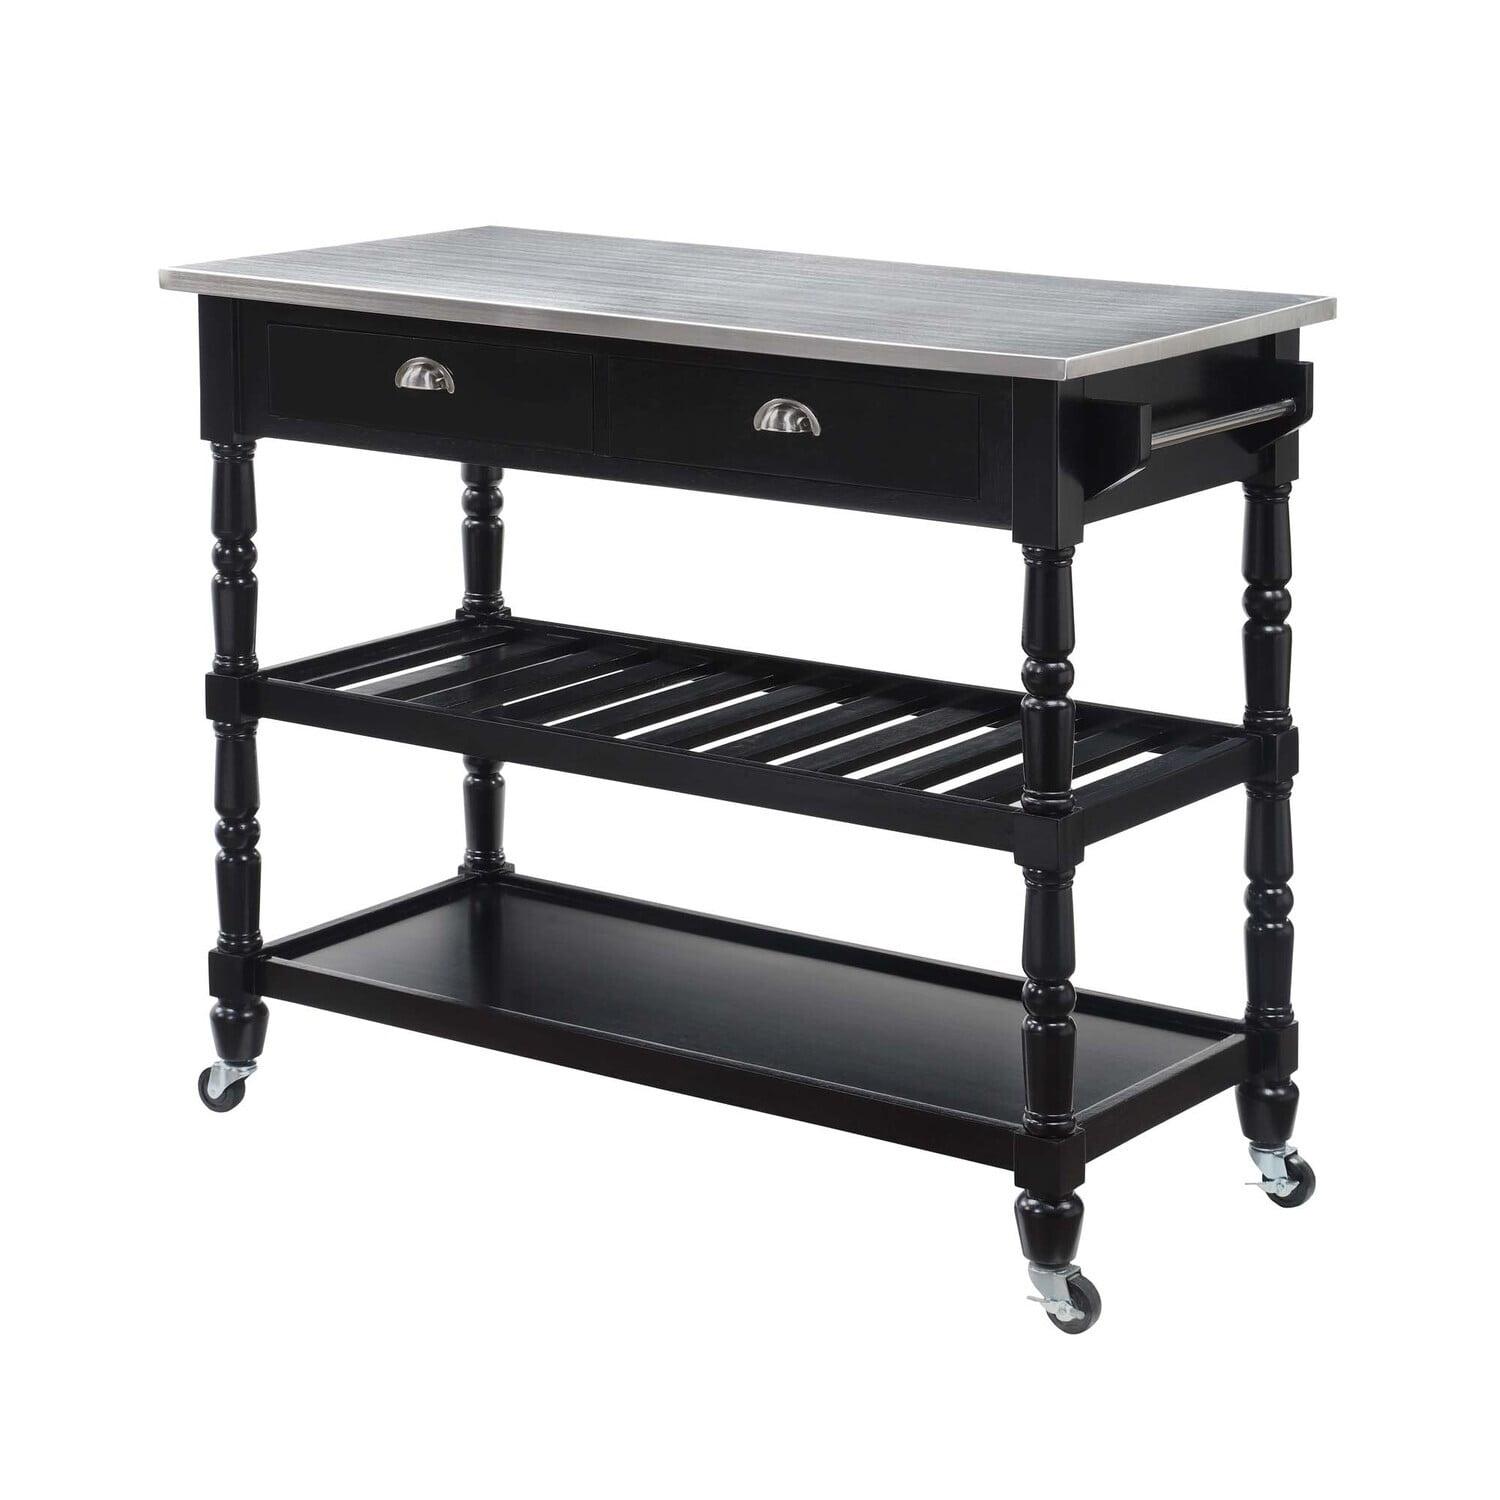 French Country Elegance Stainless Steel & Black Kitchen Cart with Wine Storage